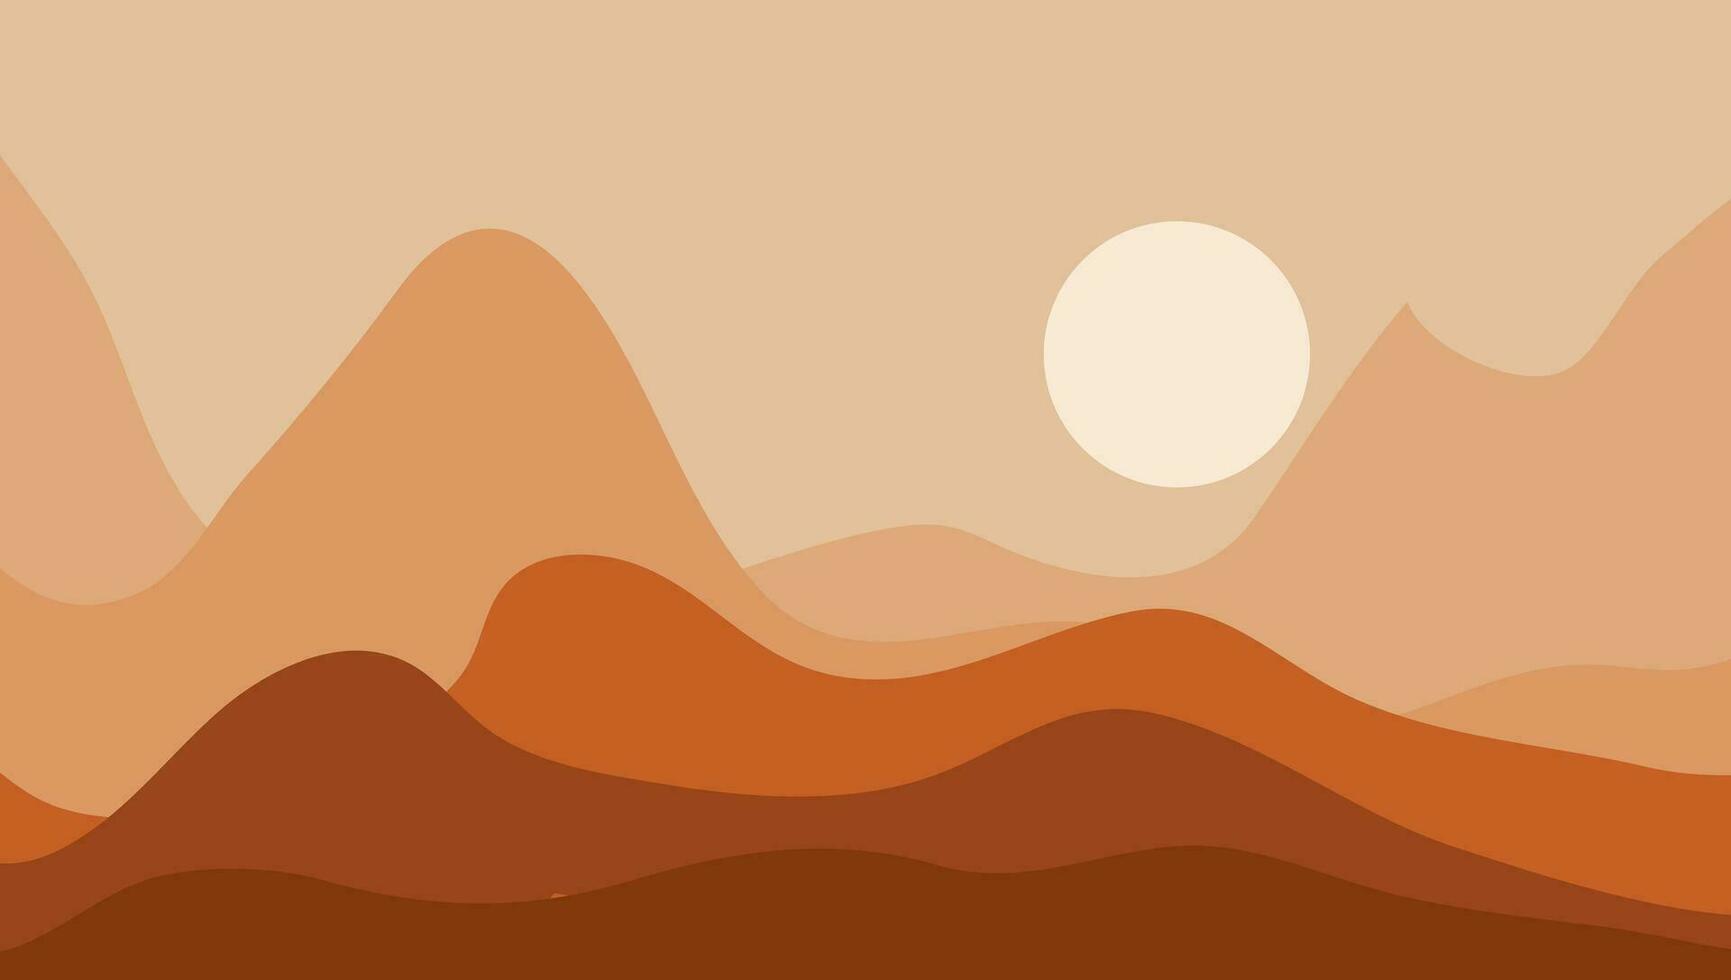 abstract landscape posters. Modern background flat design, contemporary boho sun moon mountains vector